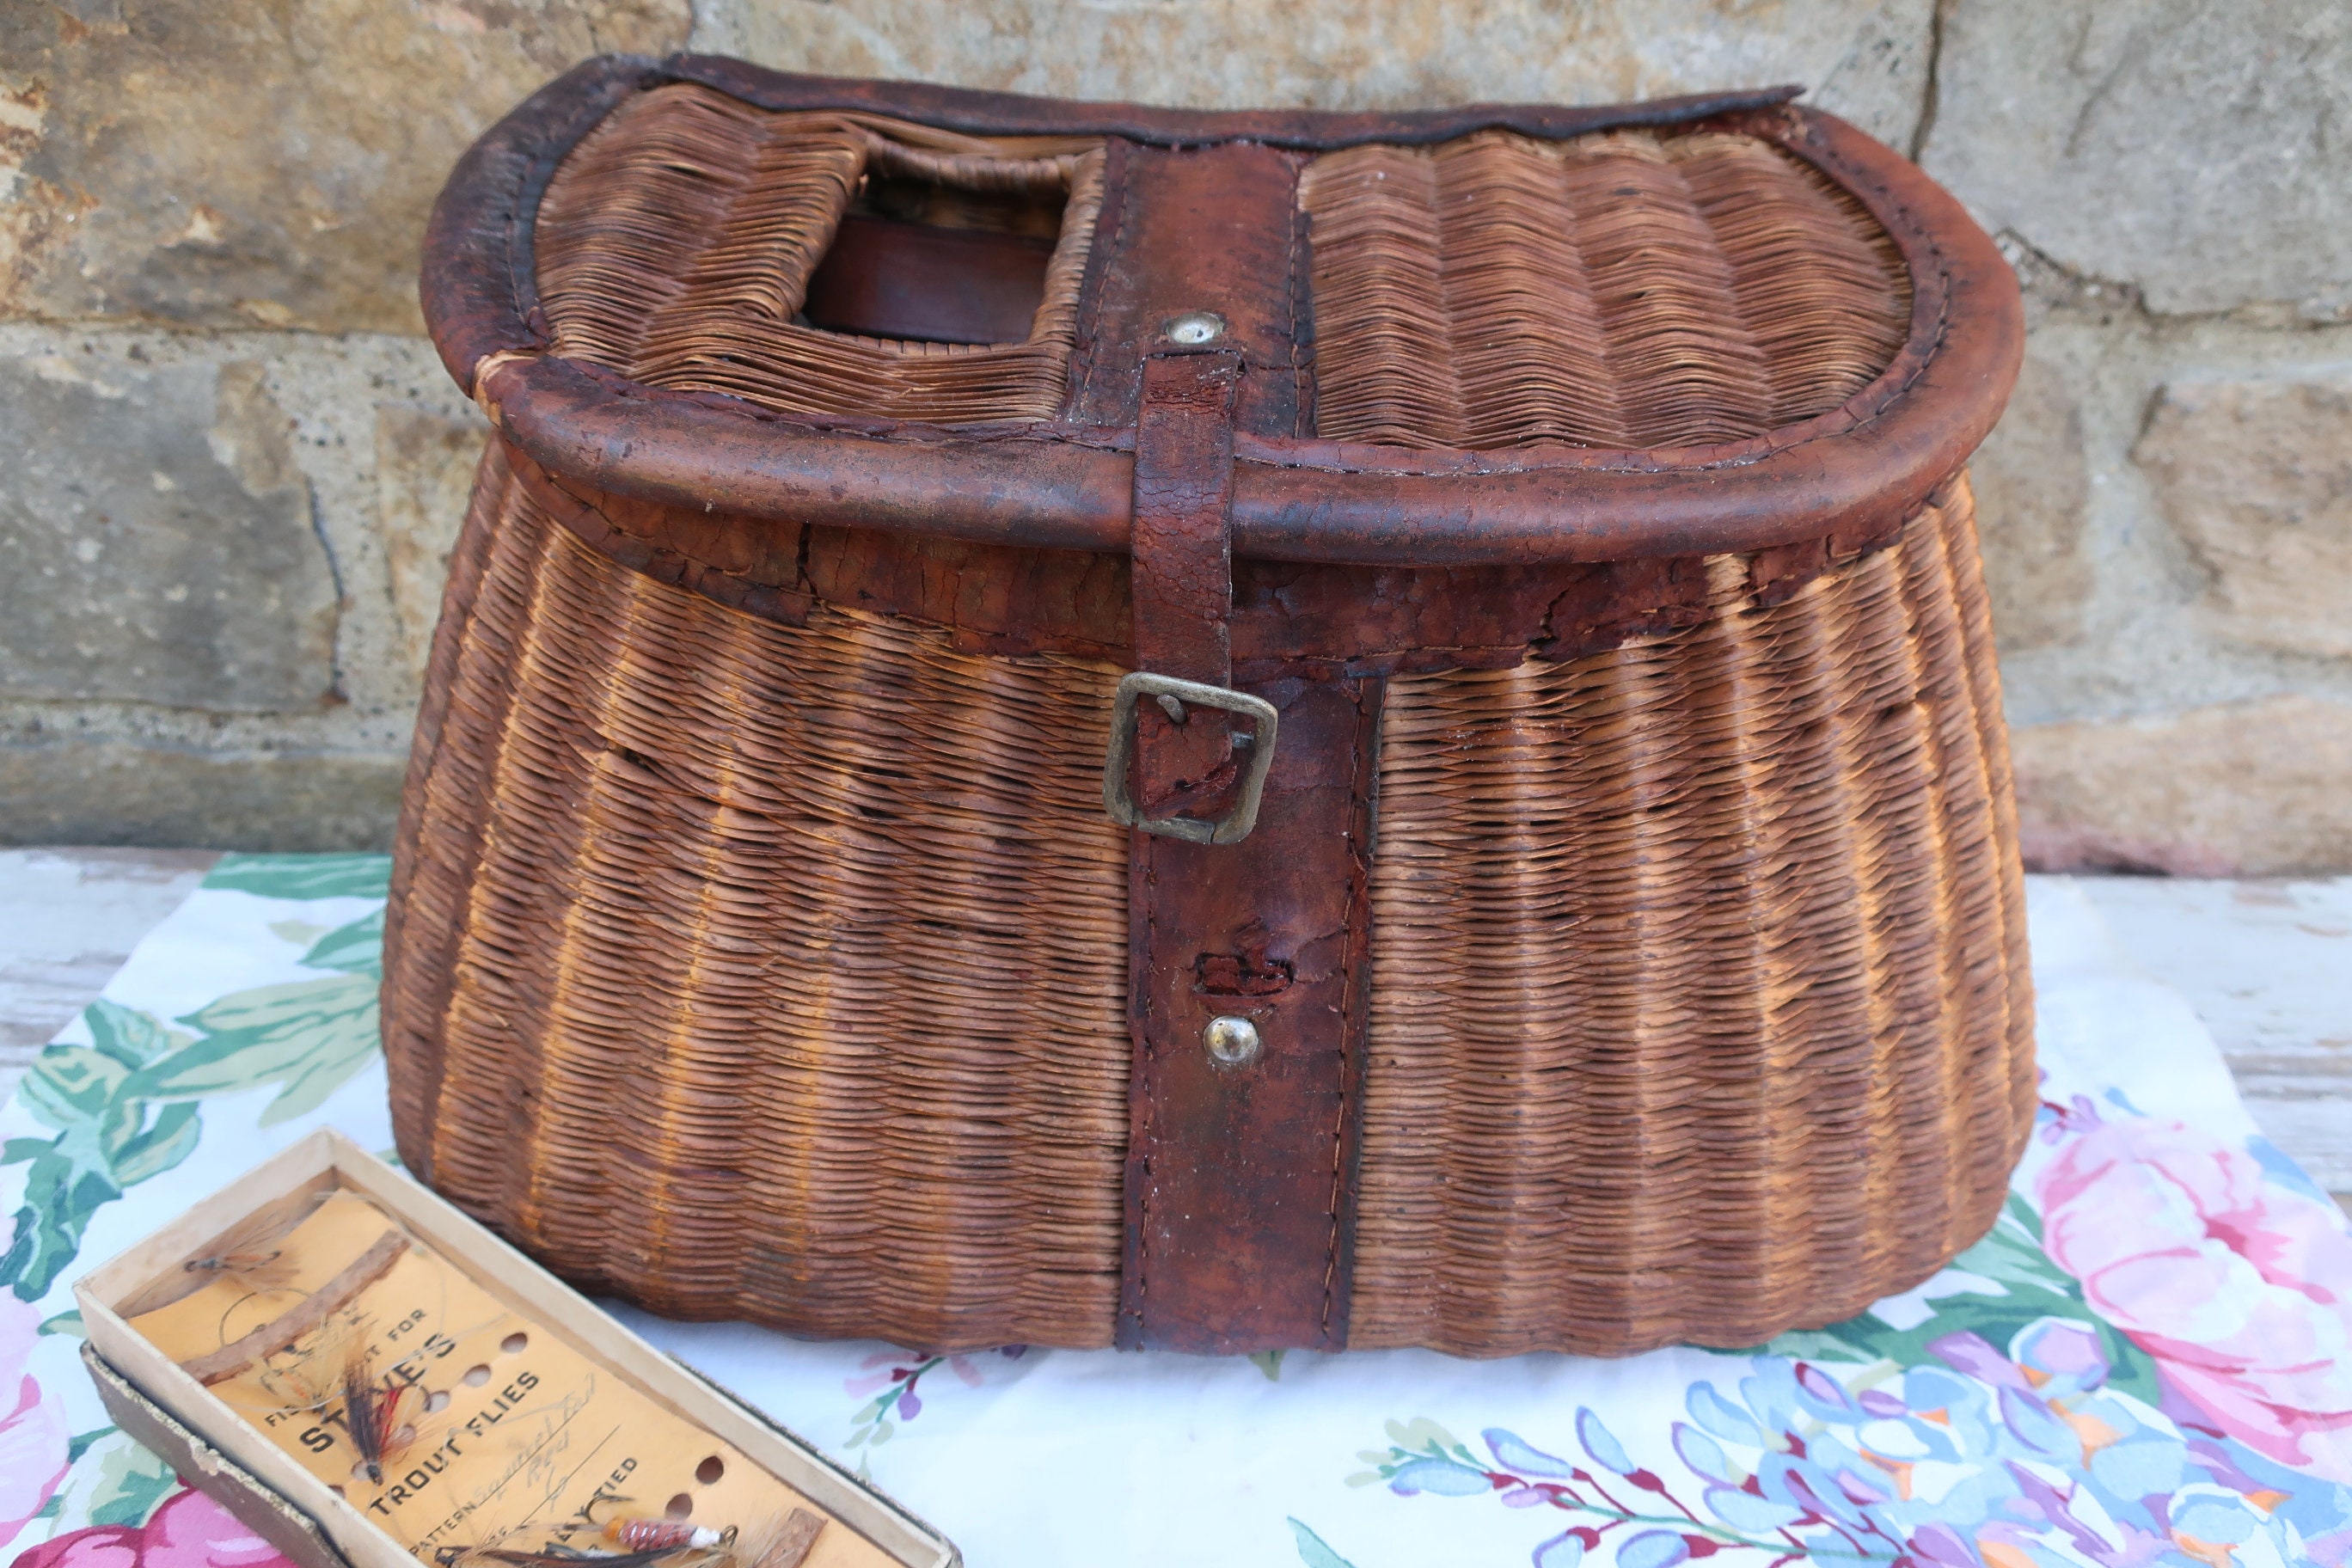 Wicker Fishing Creel Basket With Weathered Leather Trim, Woven Fly